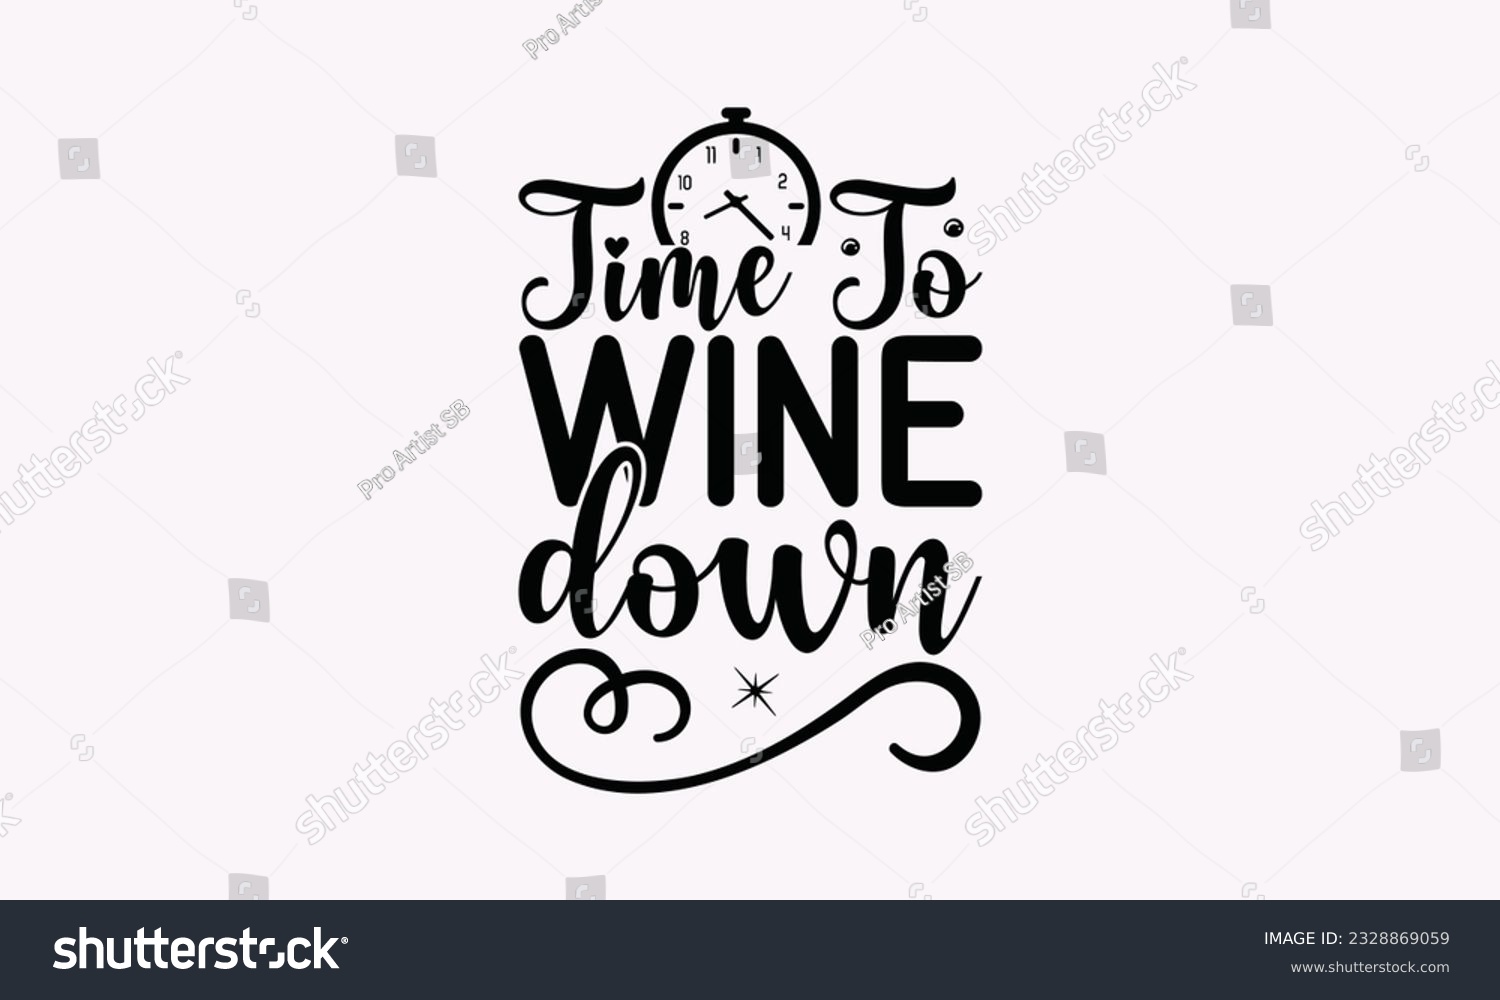 SVG of Time To Wine Down - Alcohol SVG Design, Drink Quotes, Calligraphy graphic design, Typography poster with old style camera and quote. svg